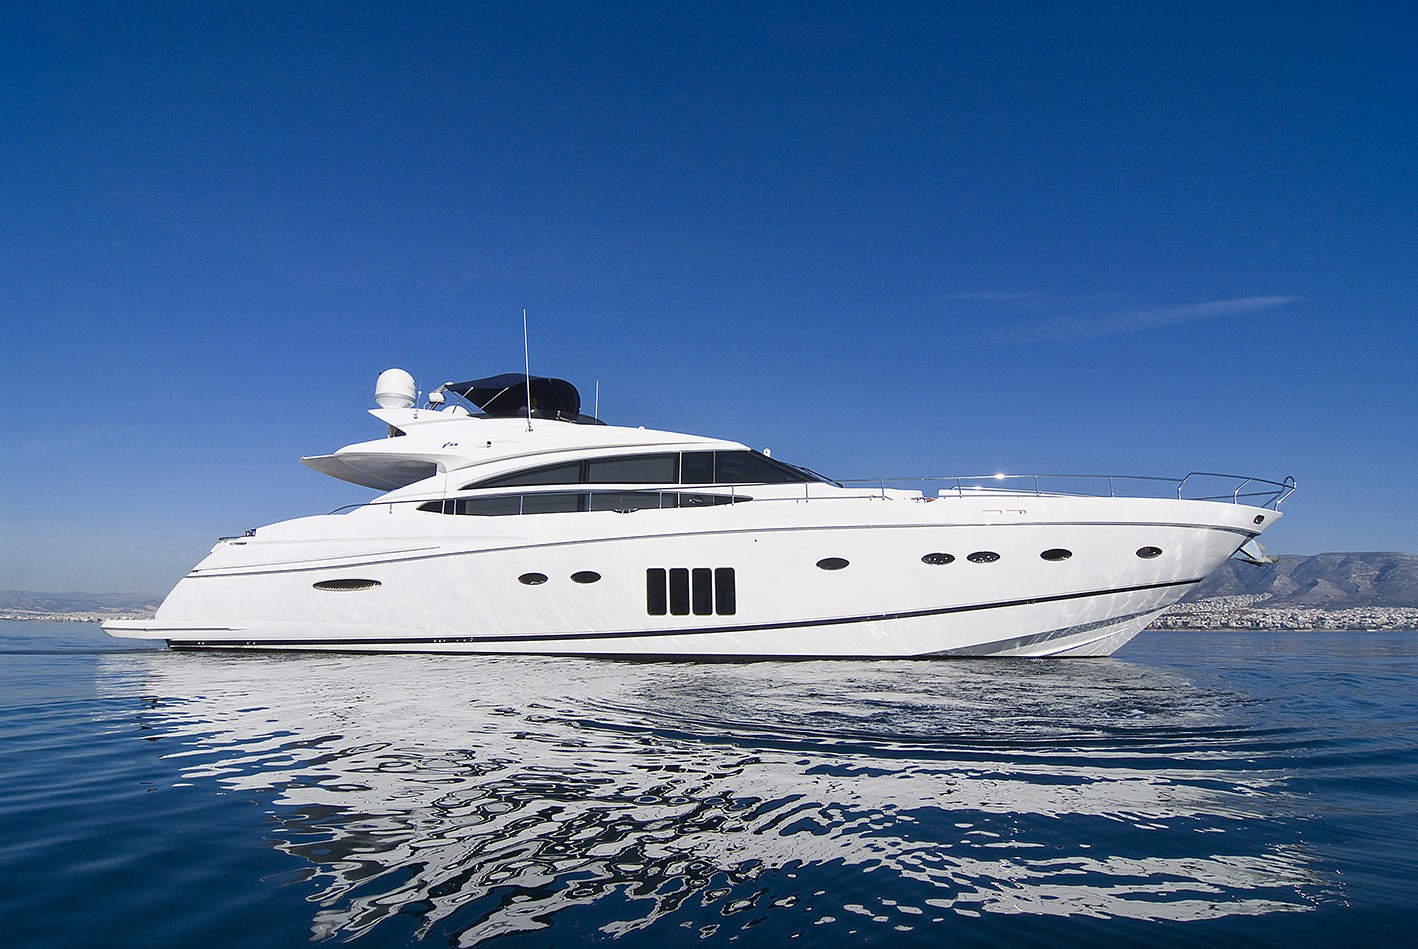 The 26m Yacht CATHERINE